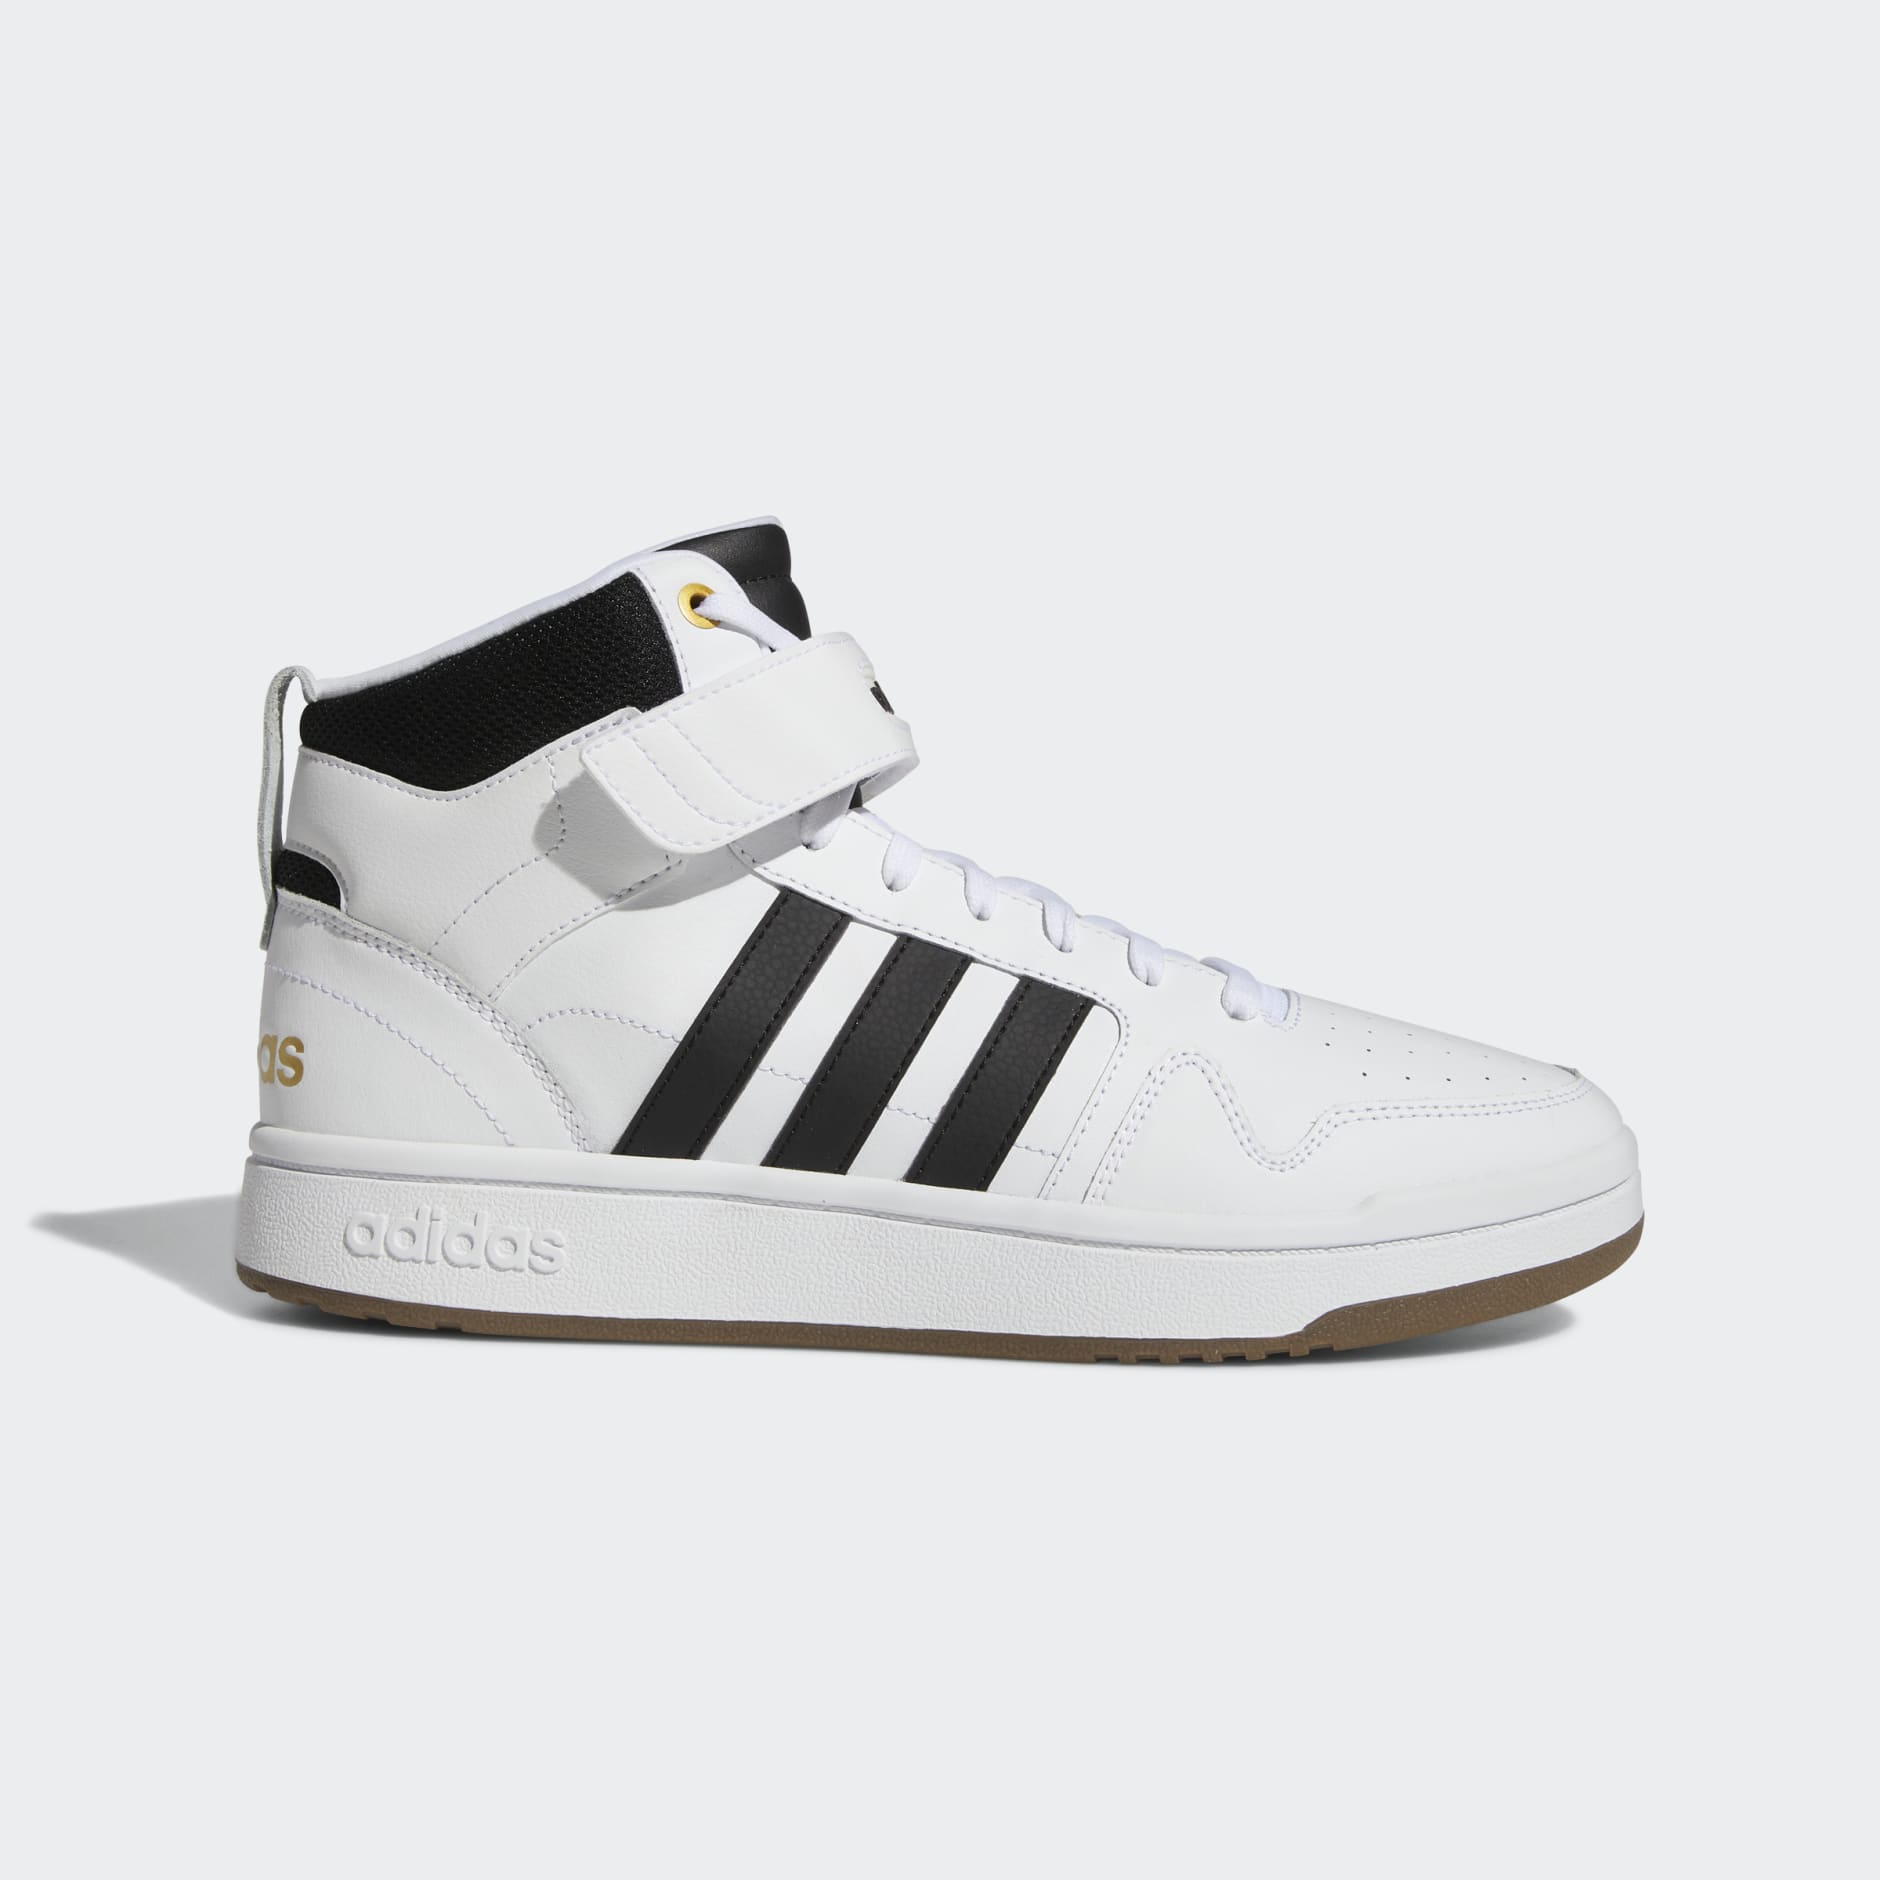 Shoes - Postmove Mid Shoes - White | adidas South Africa